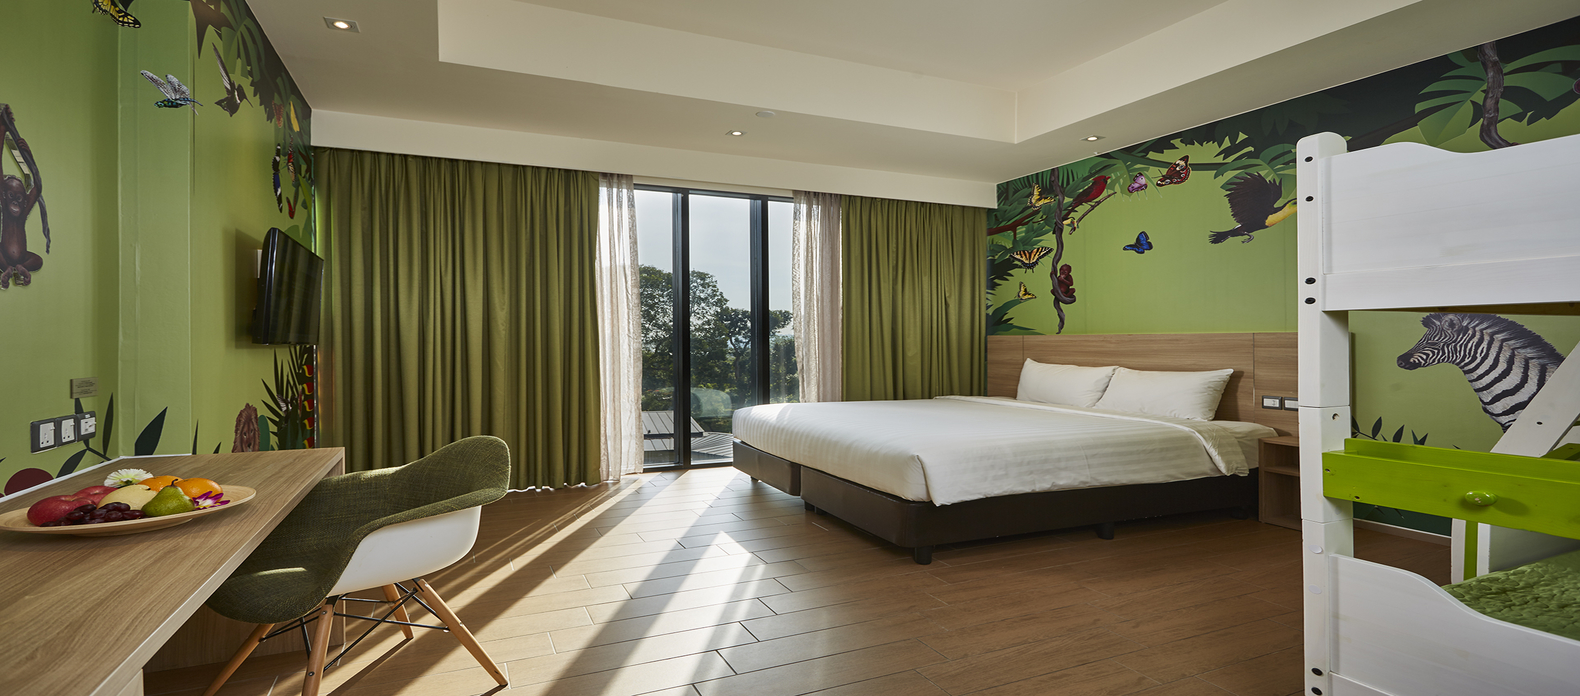 Rainforest Family - Themed rooms for families at D'Resort Singapore